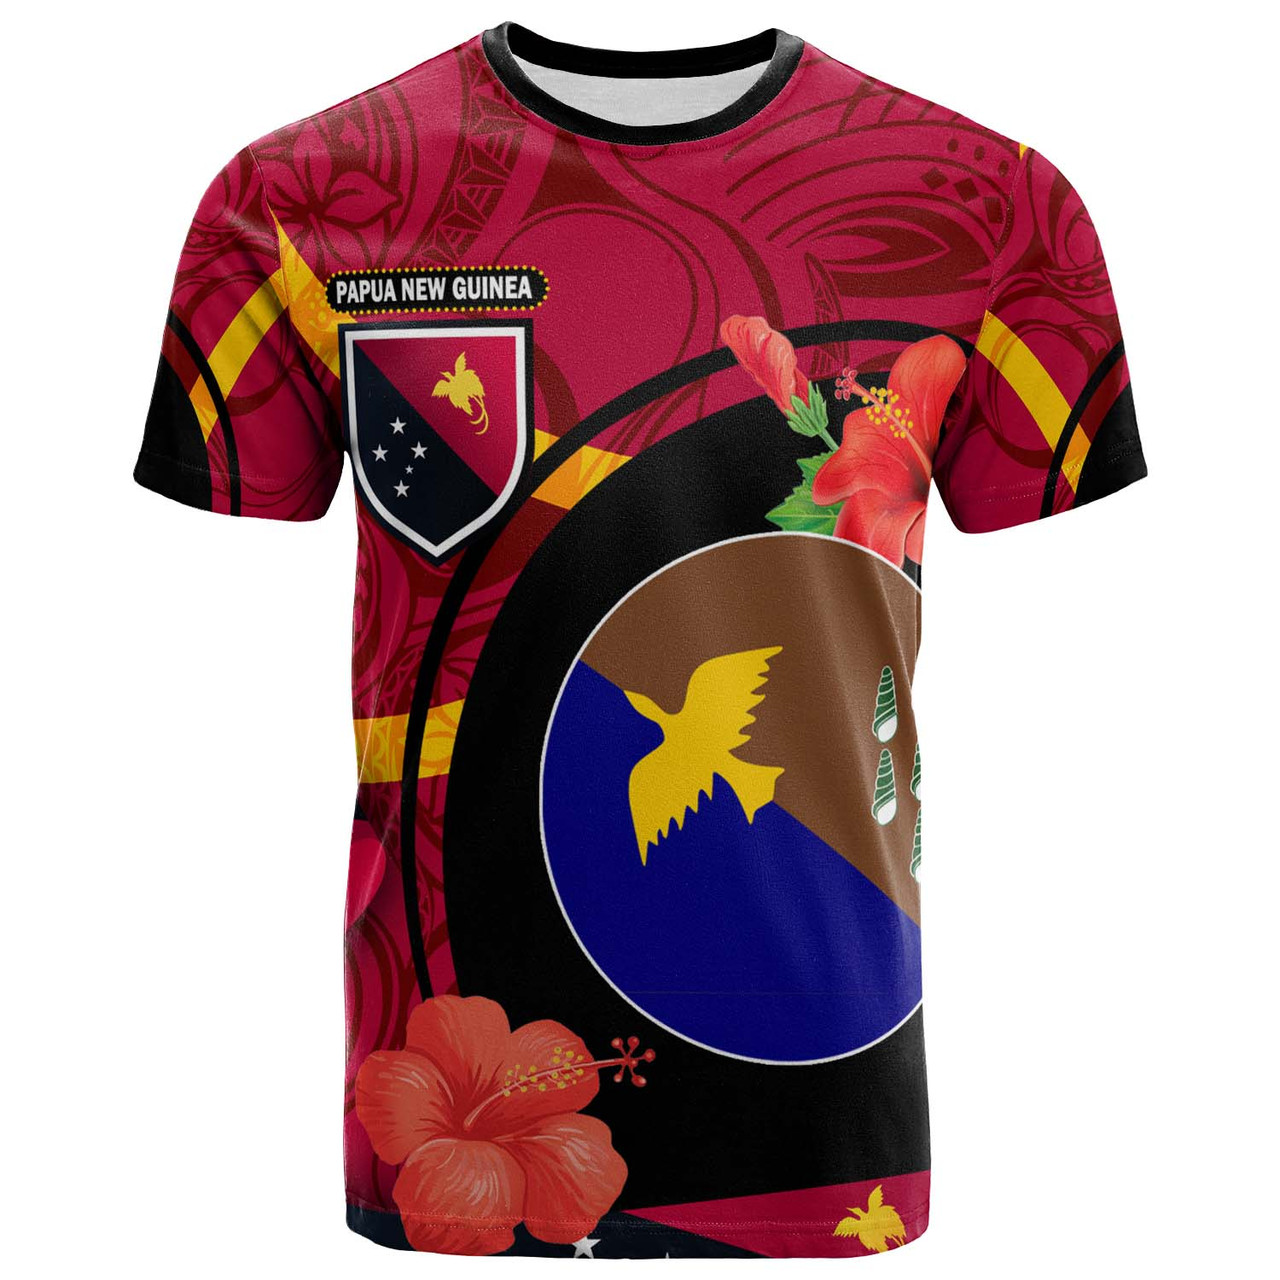 Papua New Guinea T-Shirt - Manus Flag of PNG with Hibicus and Polynesian Culture T-Shirt